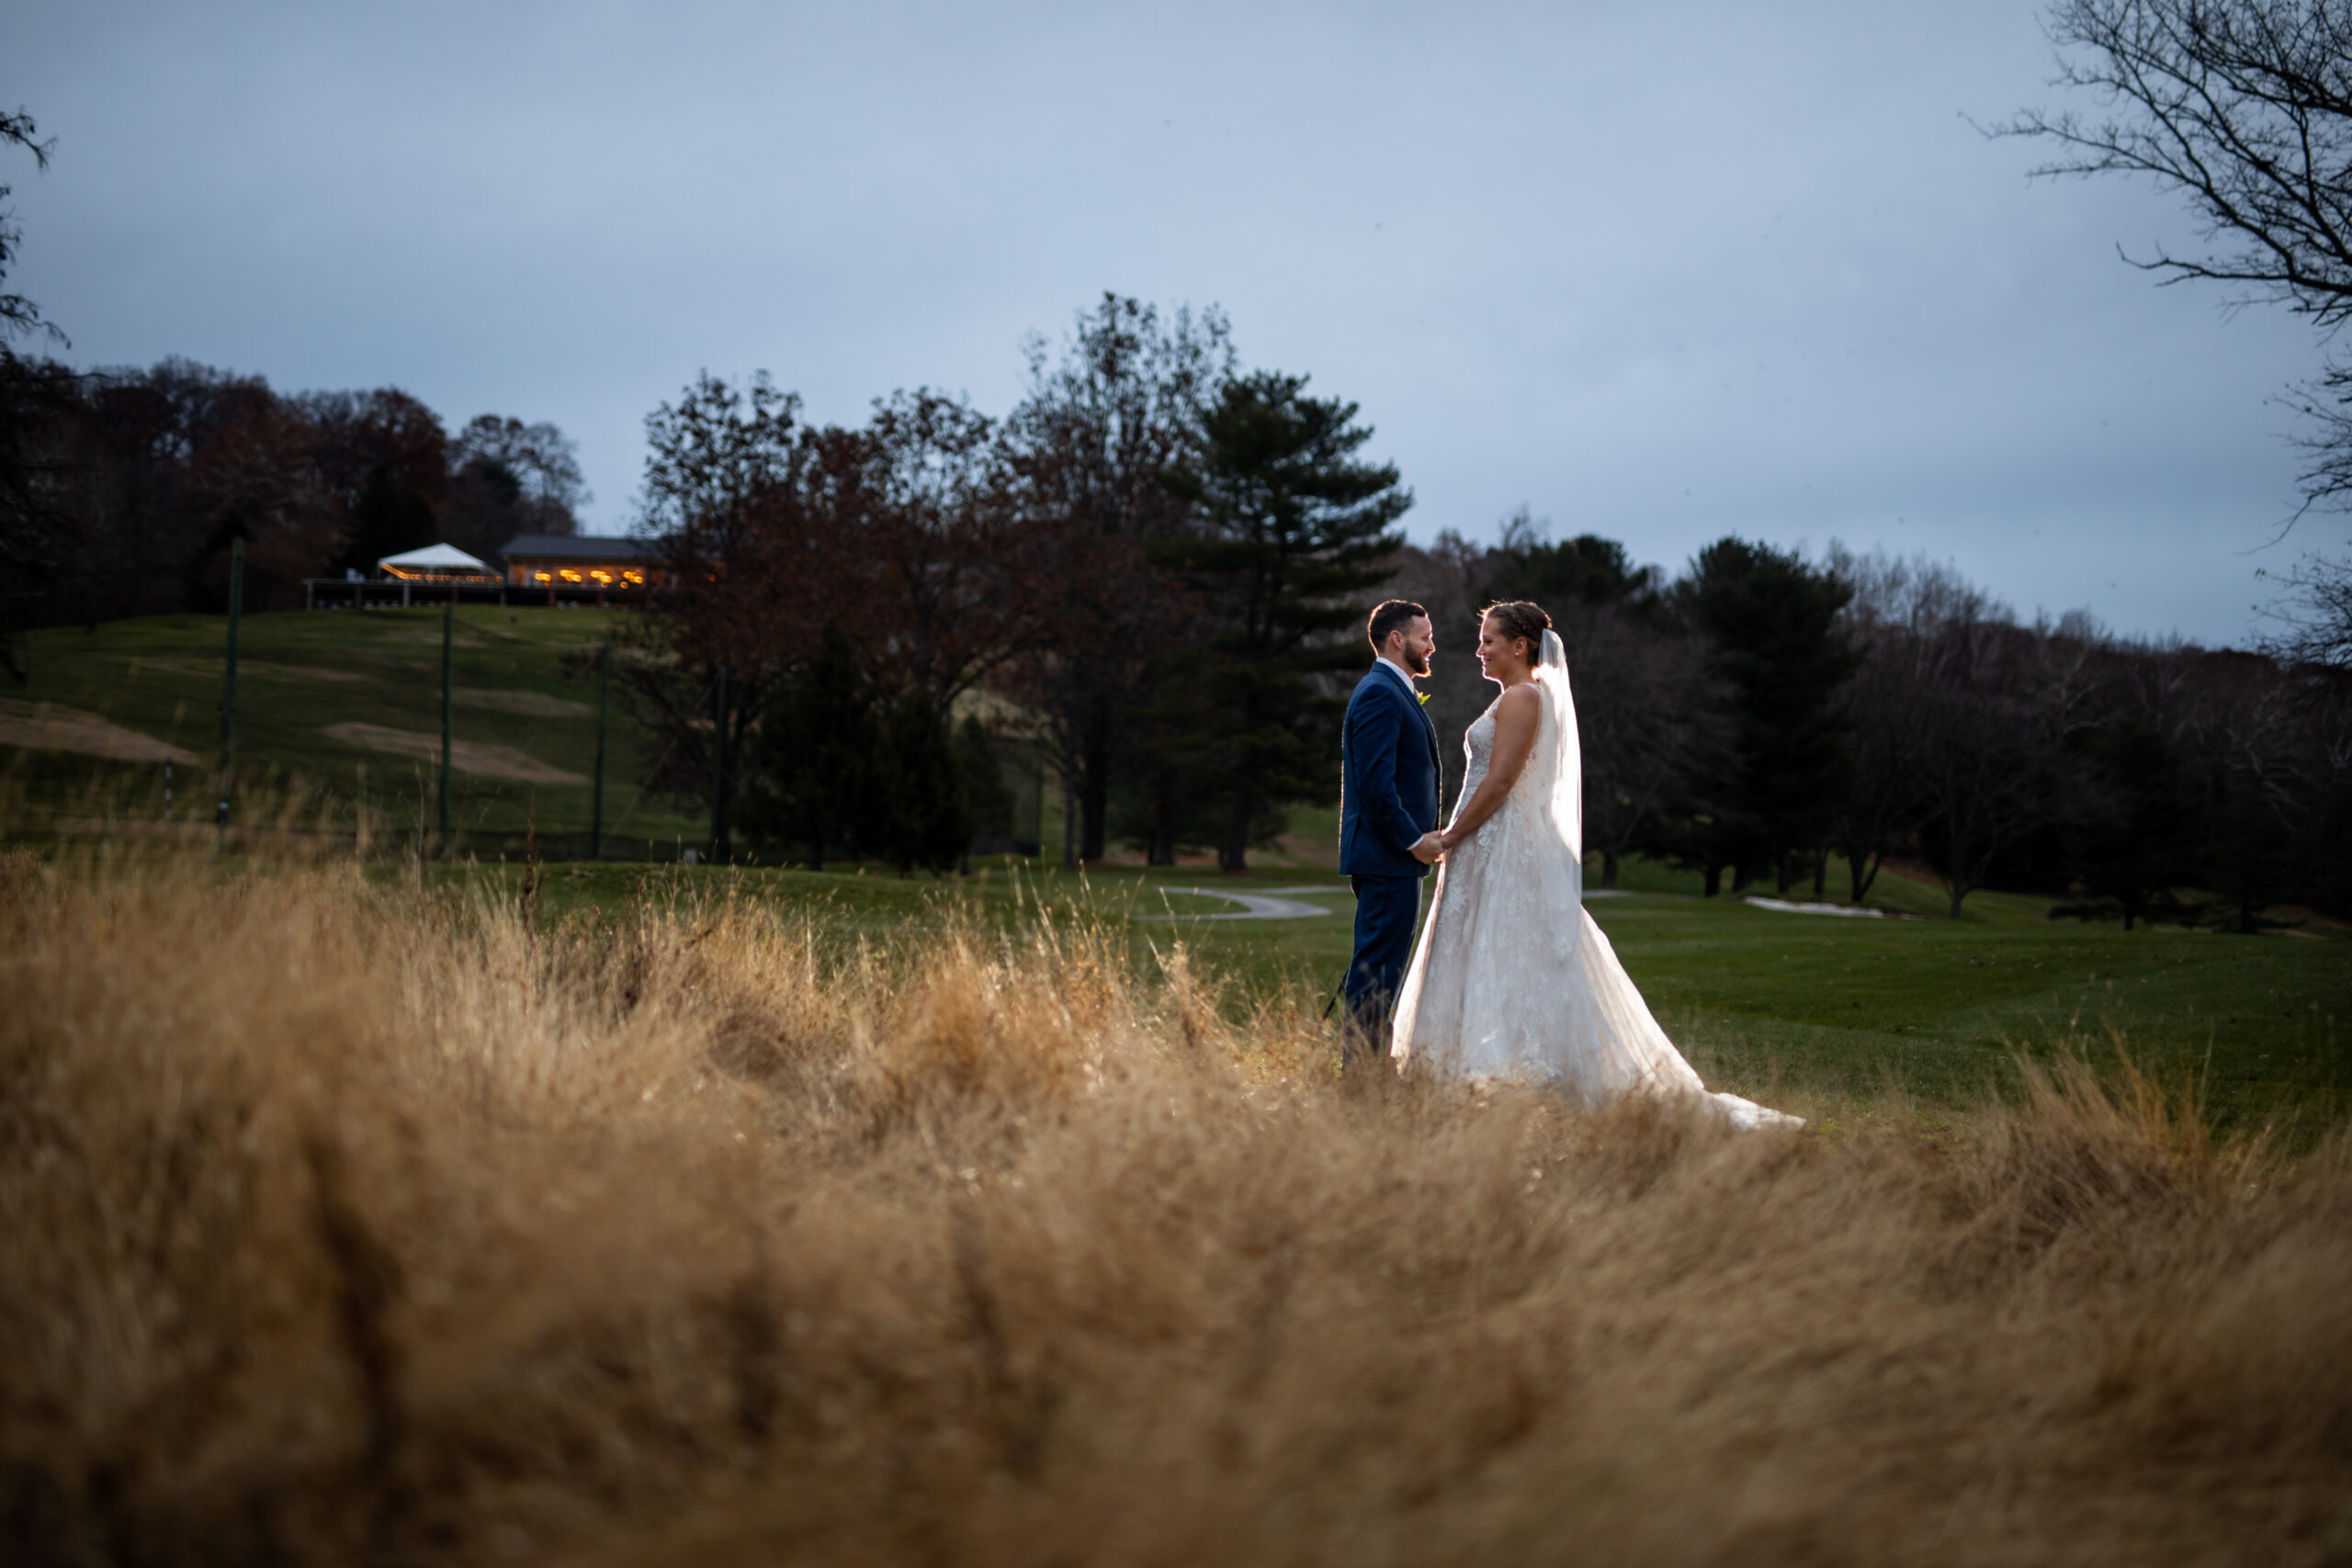 Wedding photography is a skilled profession, especially in Maryland. A beautiful sunset wedding photo by husband and wife team Heather & Rob Wedding Photography. Golf course weddings at Hunt Valley Country Club in Phoenix, Maryland.